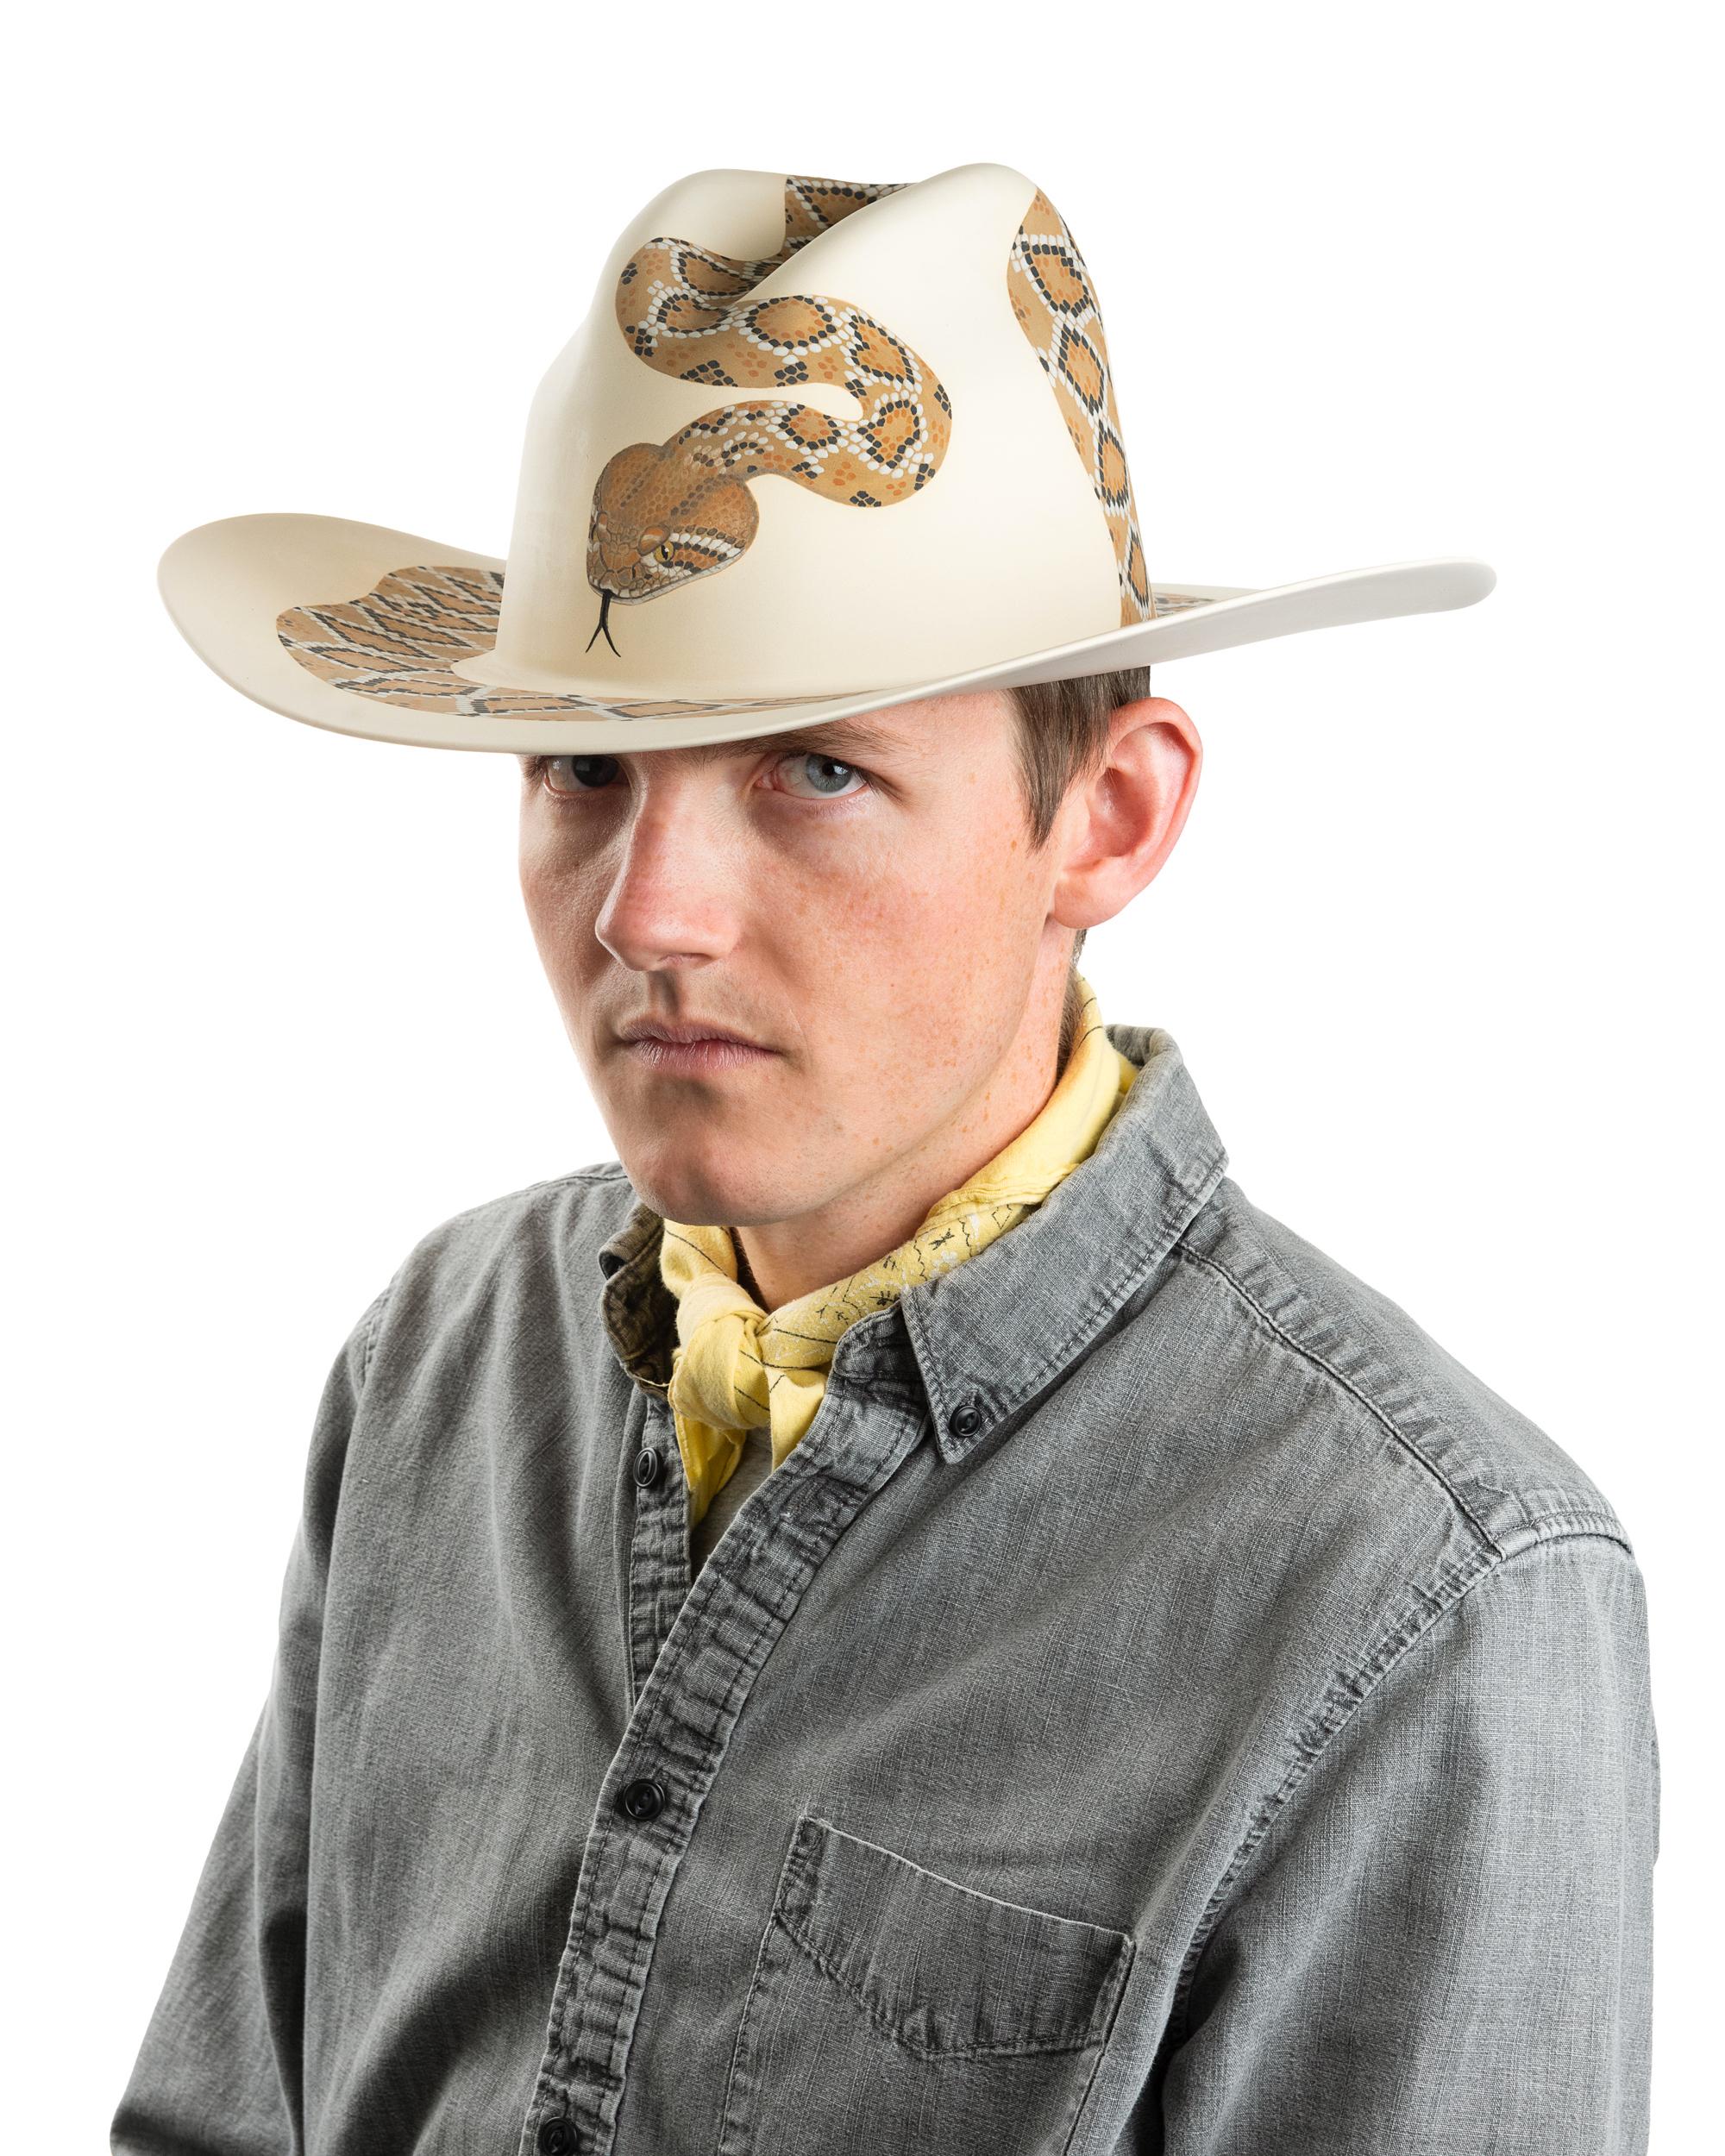 This is a ceramic cowboy hat. Crotalus depicts a diamondback rattlesnake. This piece is about the rattlesnake specifically as an icon in the mythology of the American frontier, and, more generally, snakes unfair vilification as a quintessential